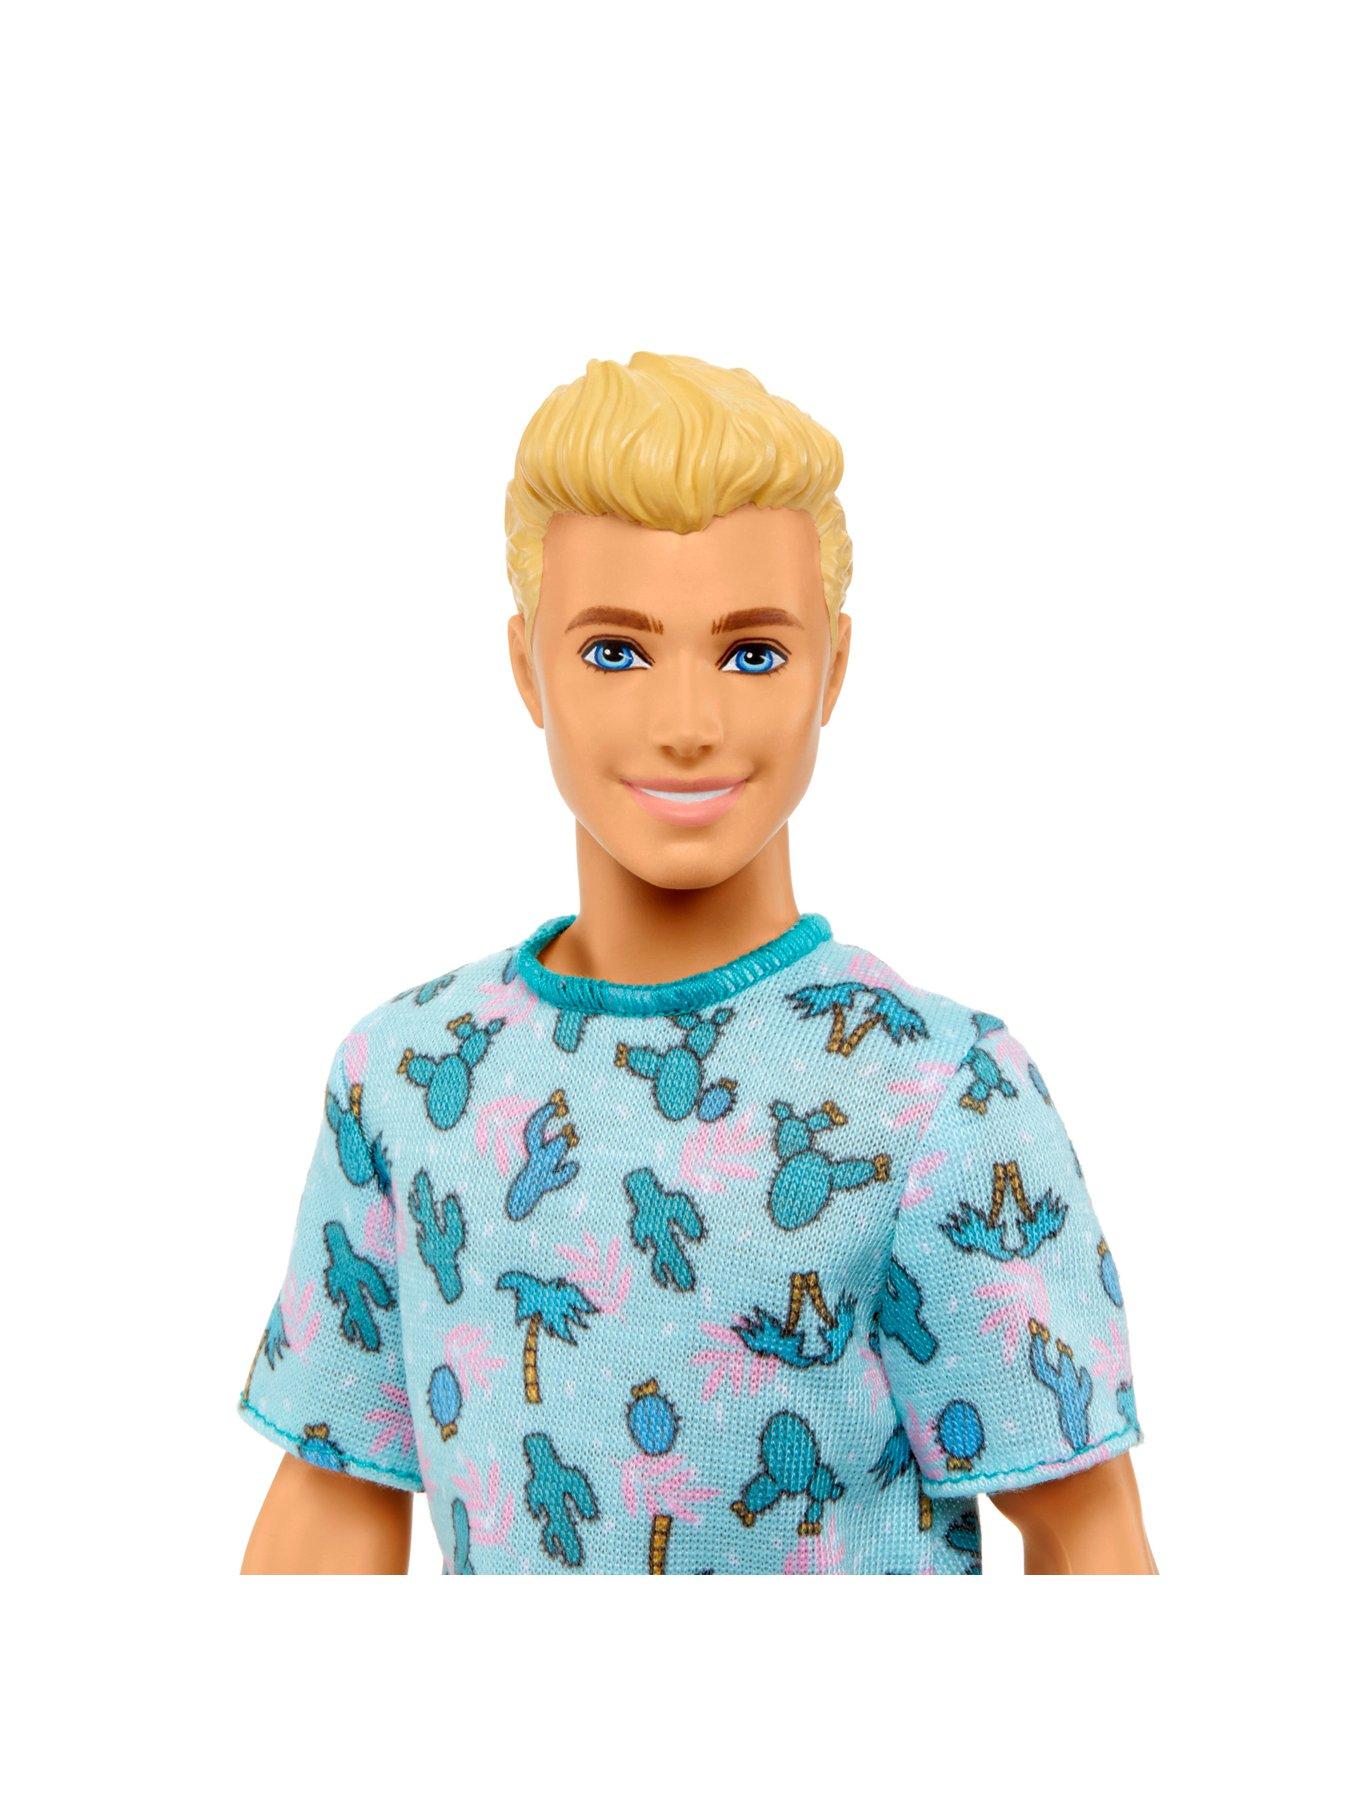 Barbie Ken Fashionista Doll - #211 with Blonde Hair and Cactus Tee